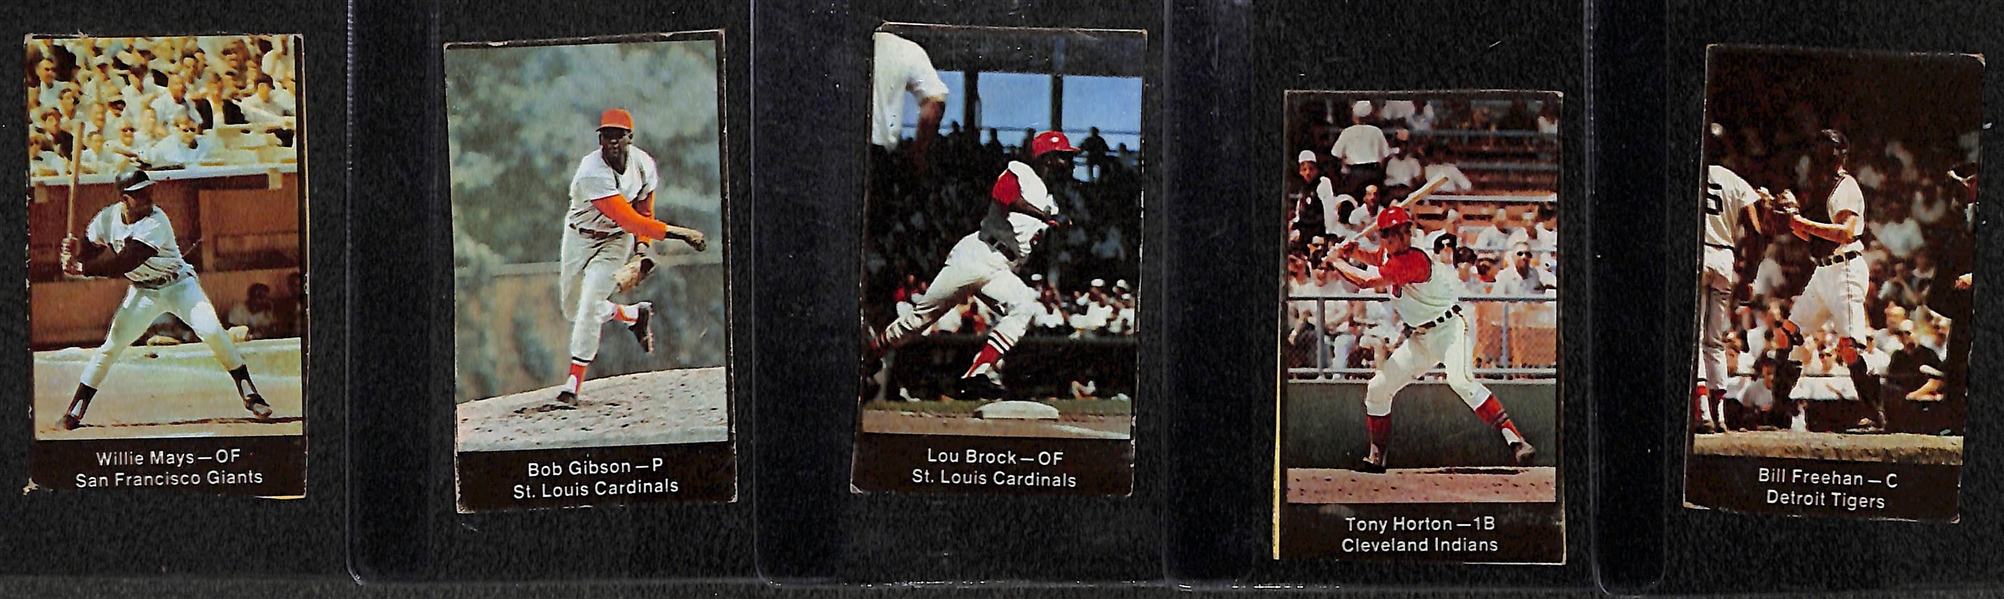 Lot of (5) Rare 1969 Nabisco Cards - Willie Mays, Bob Gibson, Lou Brock, Tony Horton (His Only Card), Bill Freehan